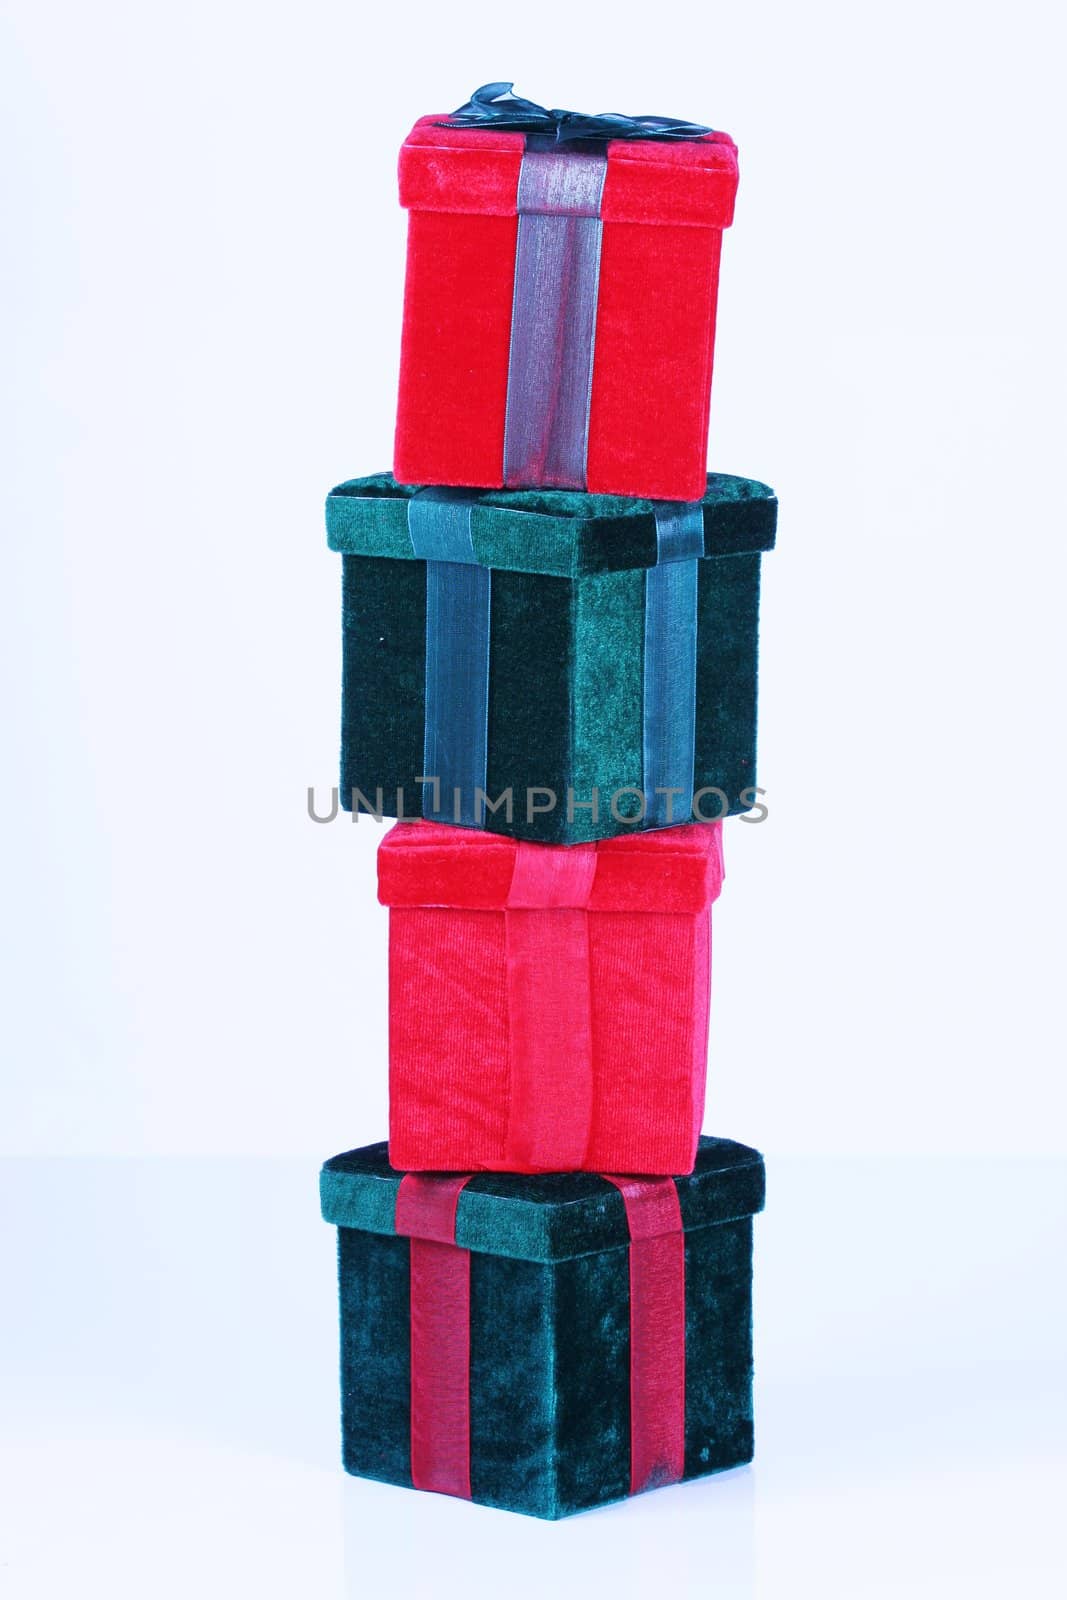 Red and green presents stacked by jarenwicklund